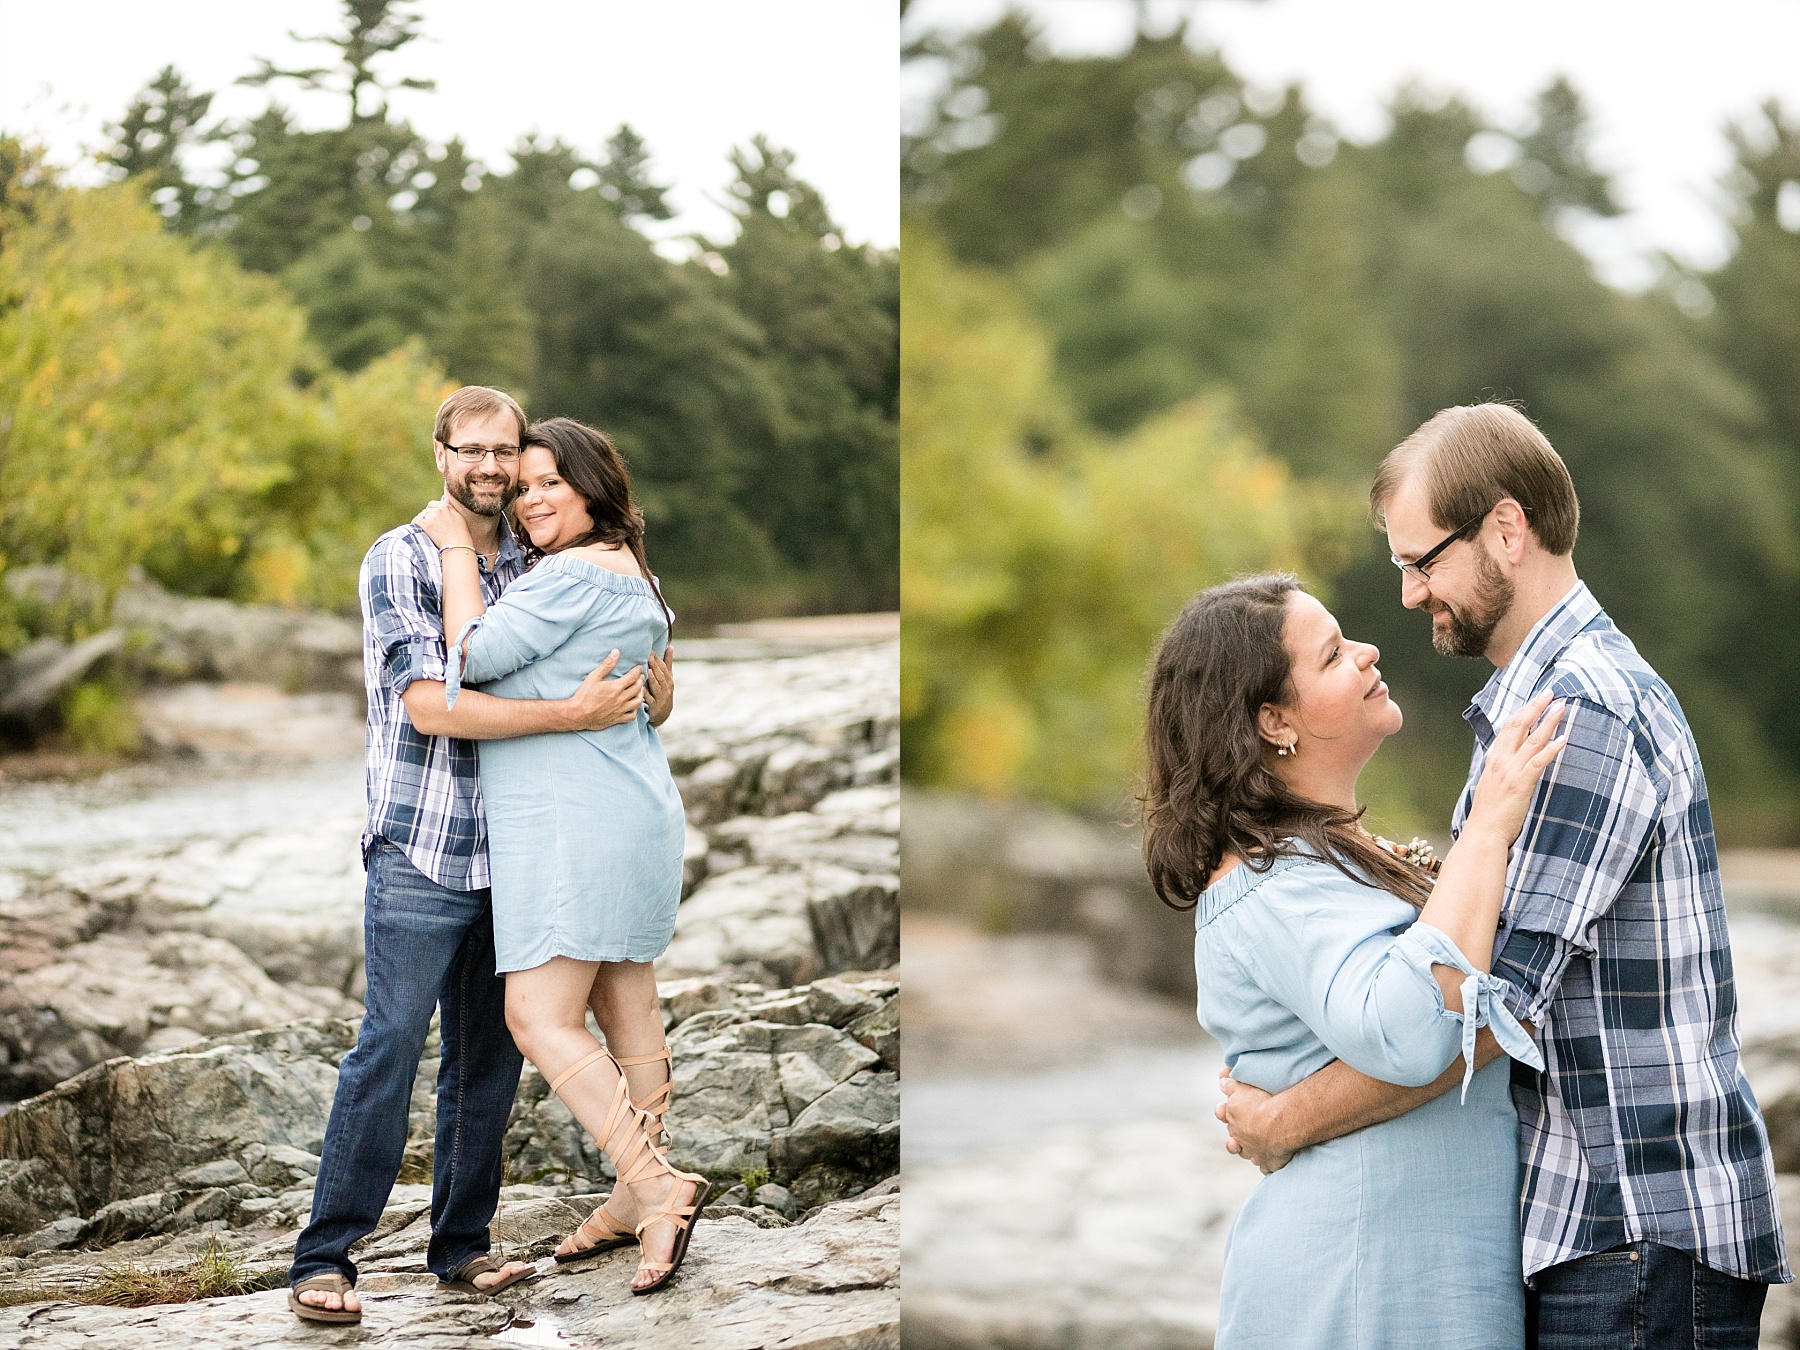 A Big Falls elopement session just outside of Eau Claire was perfect for these two hailing from different parts of the world.